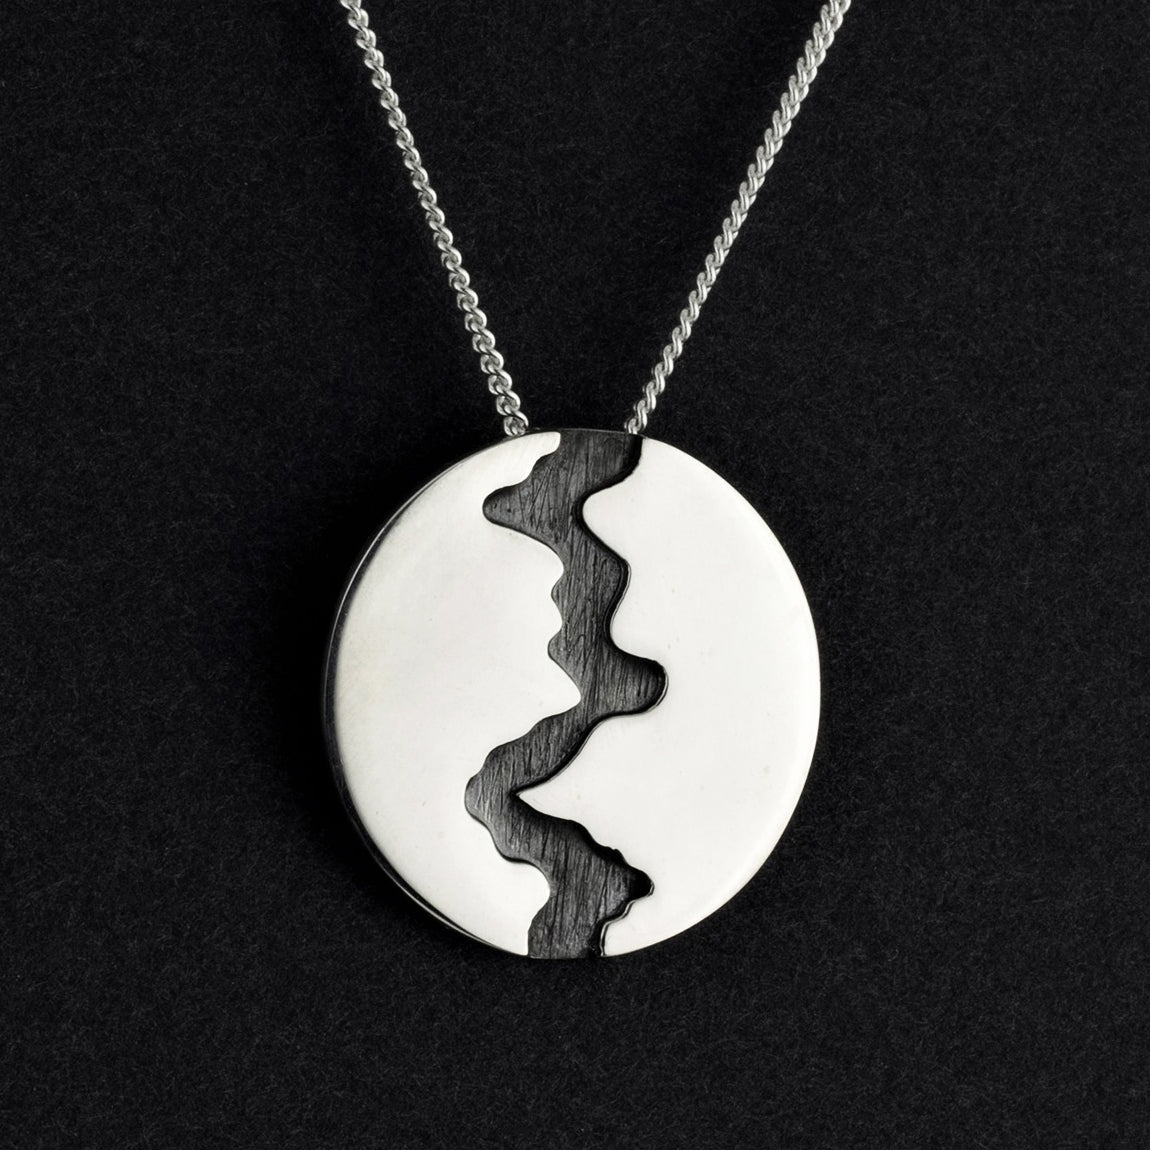 sterling silver river pendant necklace